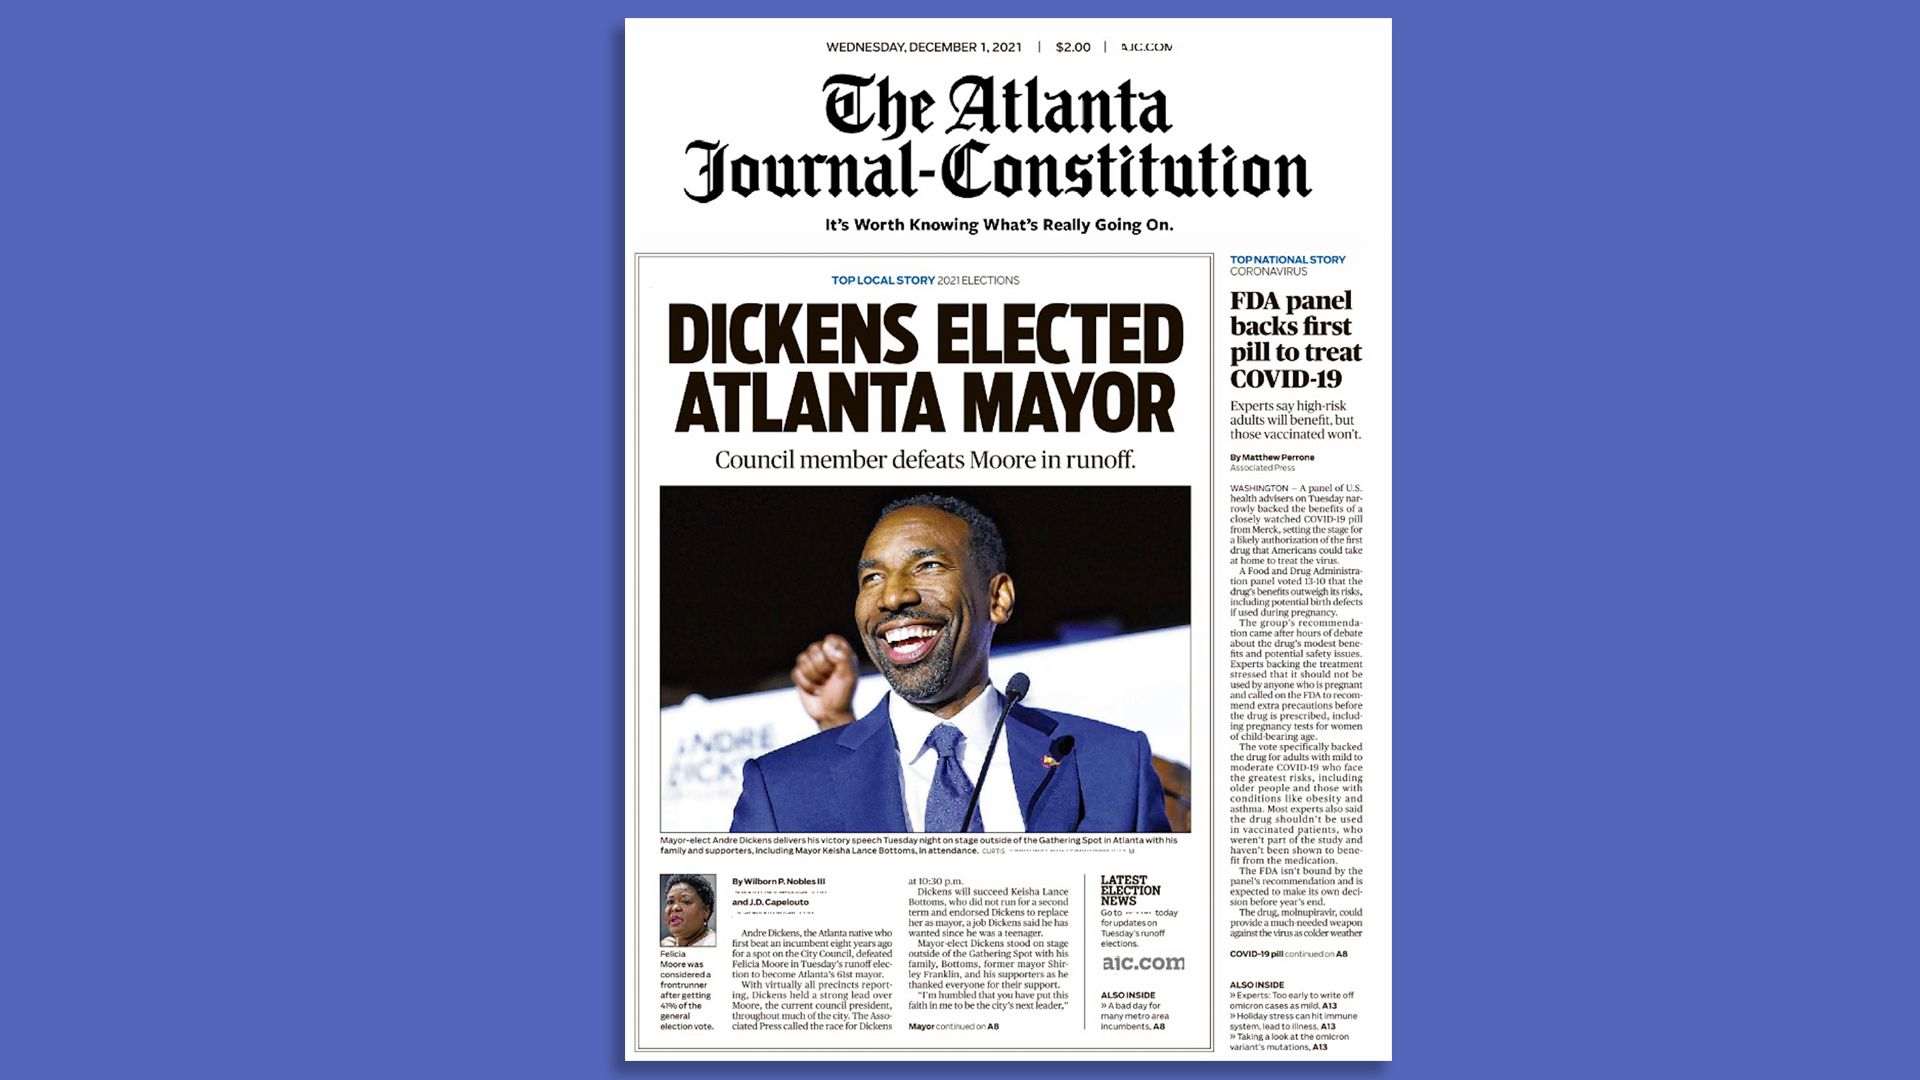 An image of the front page of the Atlanta-Journal Constitution the day after Andre Dickens won the Atlanta mayoral election